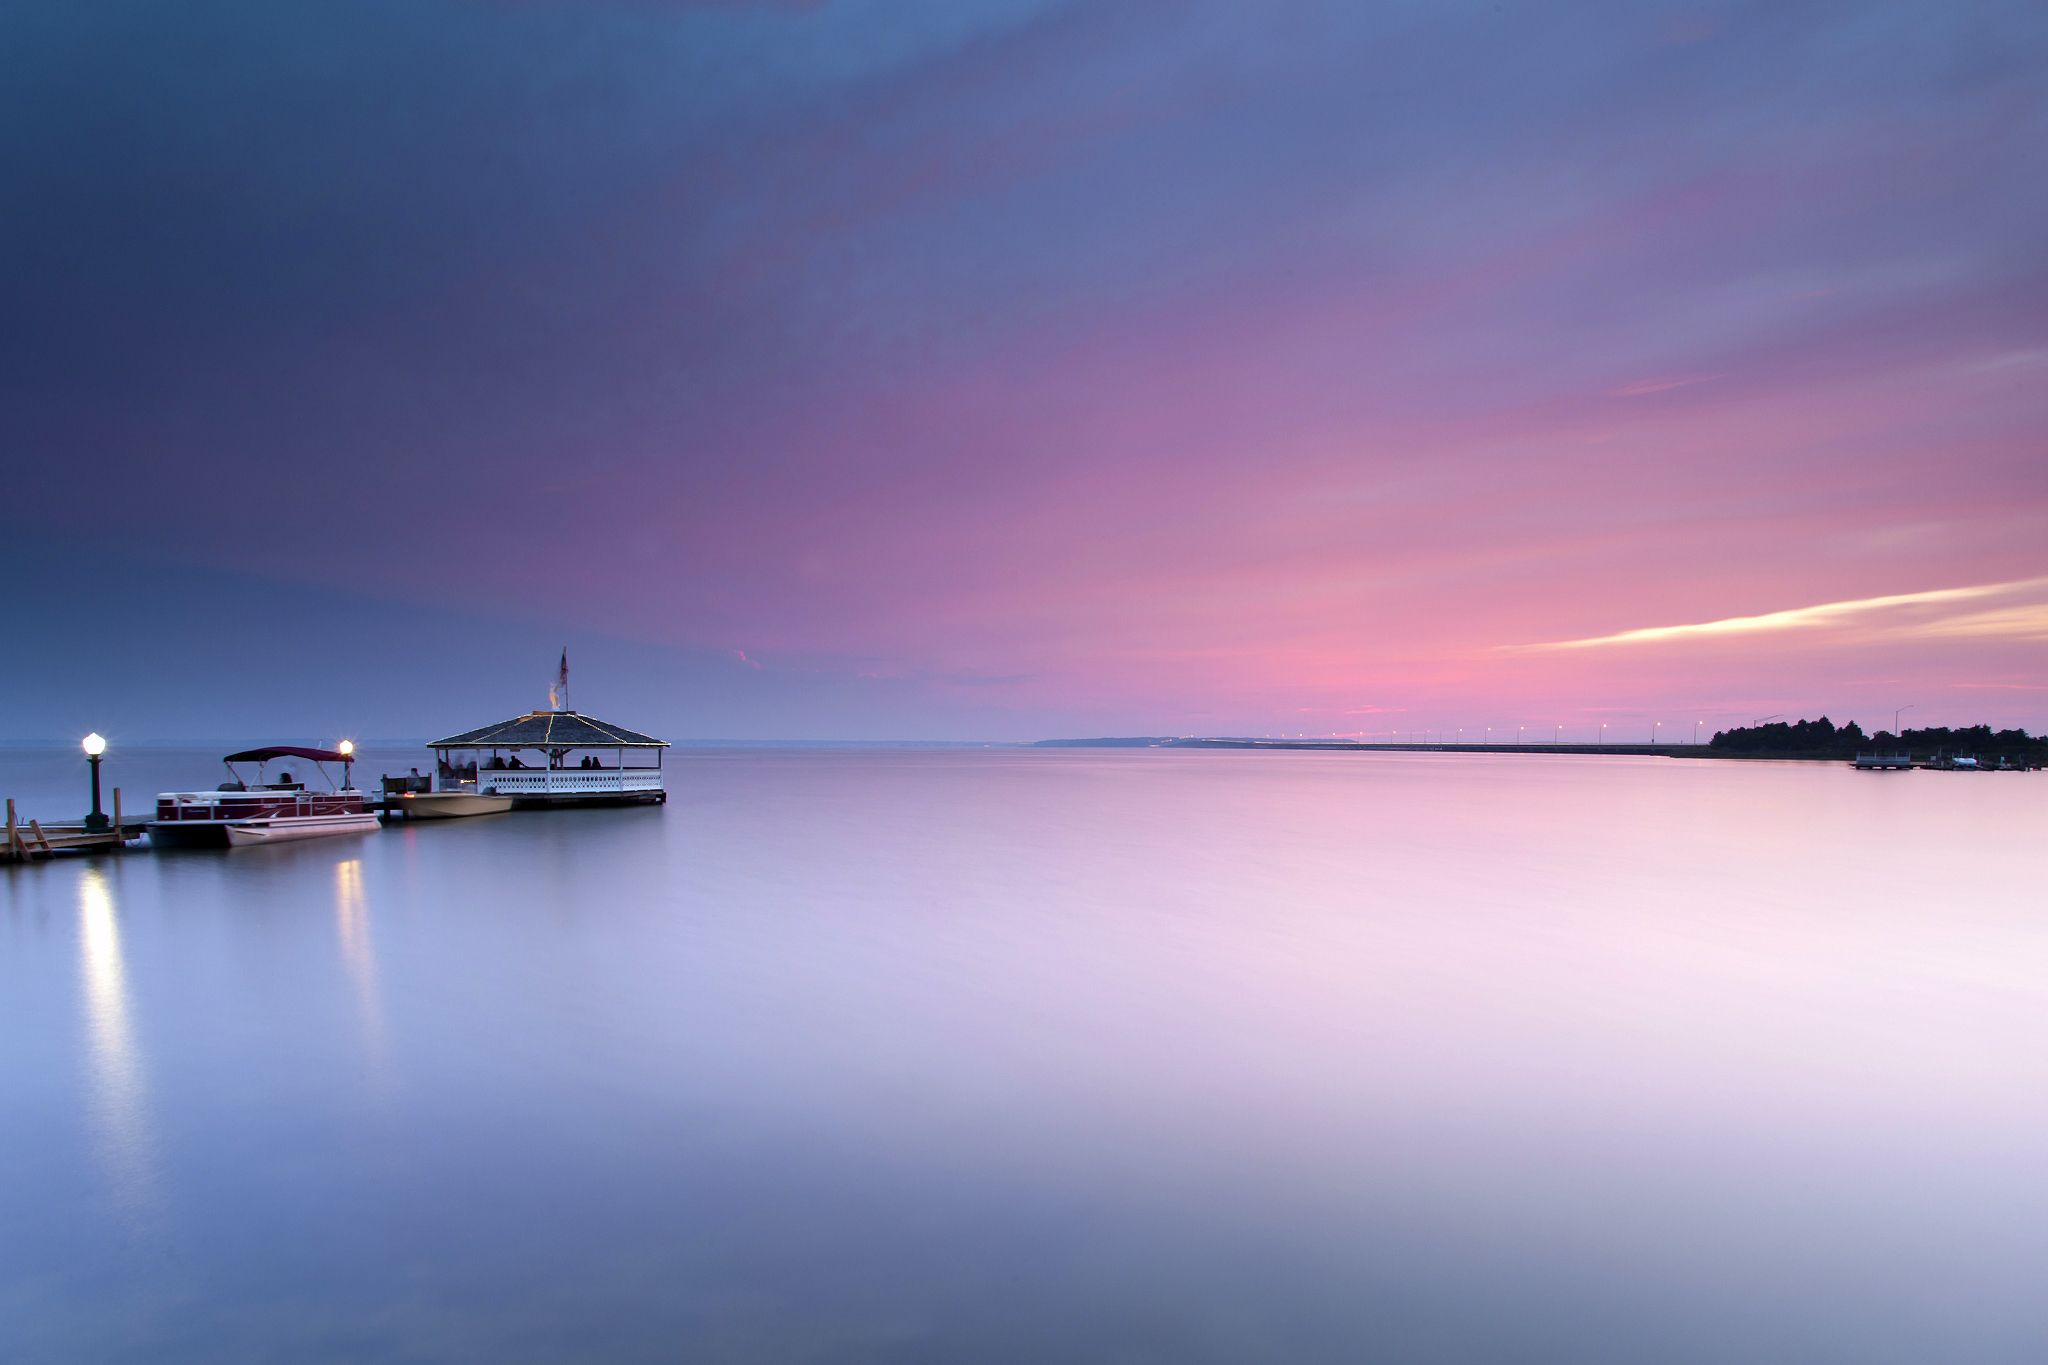 A docked boat sits on the water under a pink and blue sky. - Calming